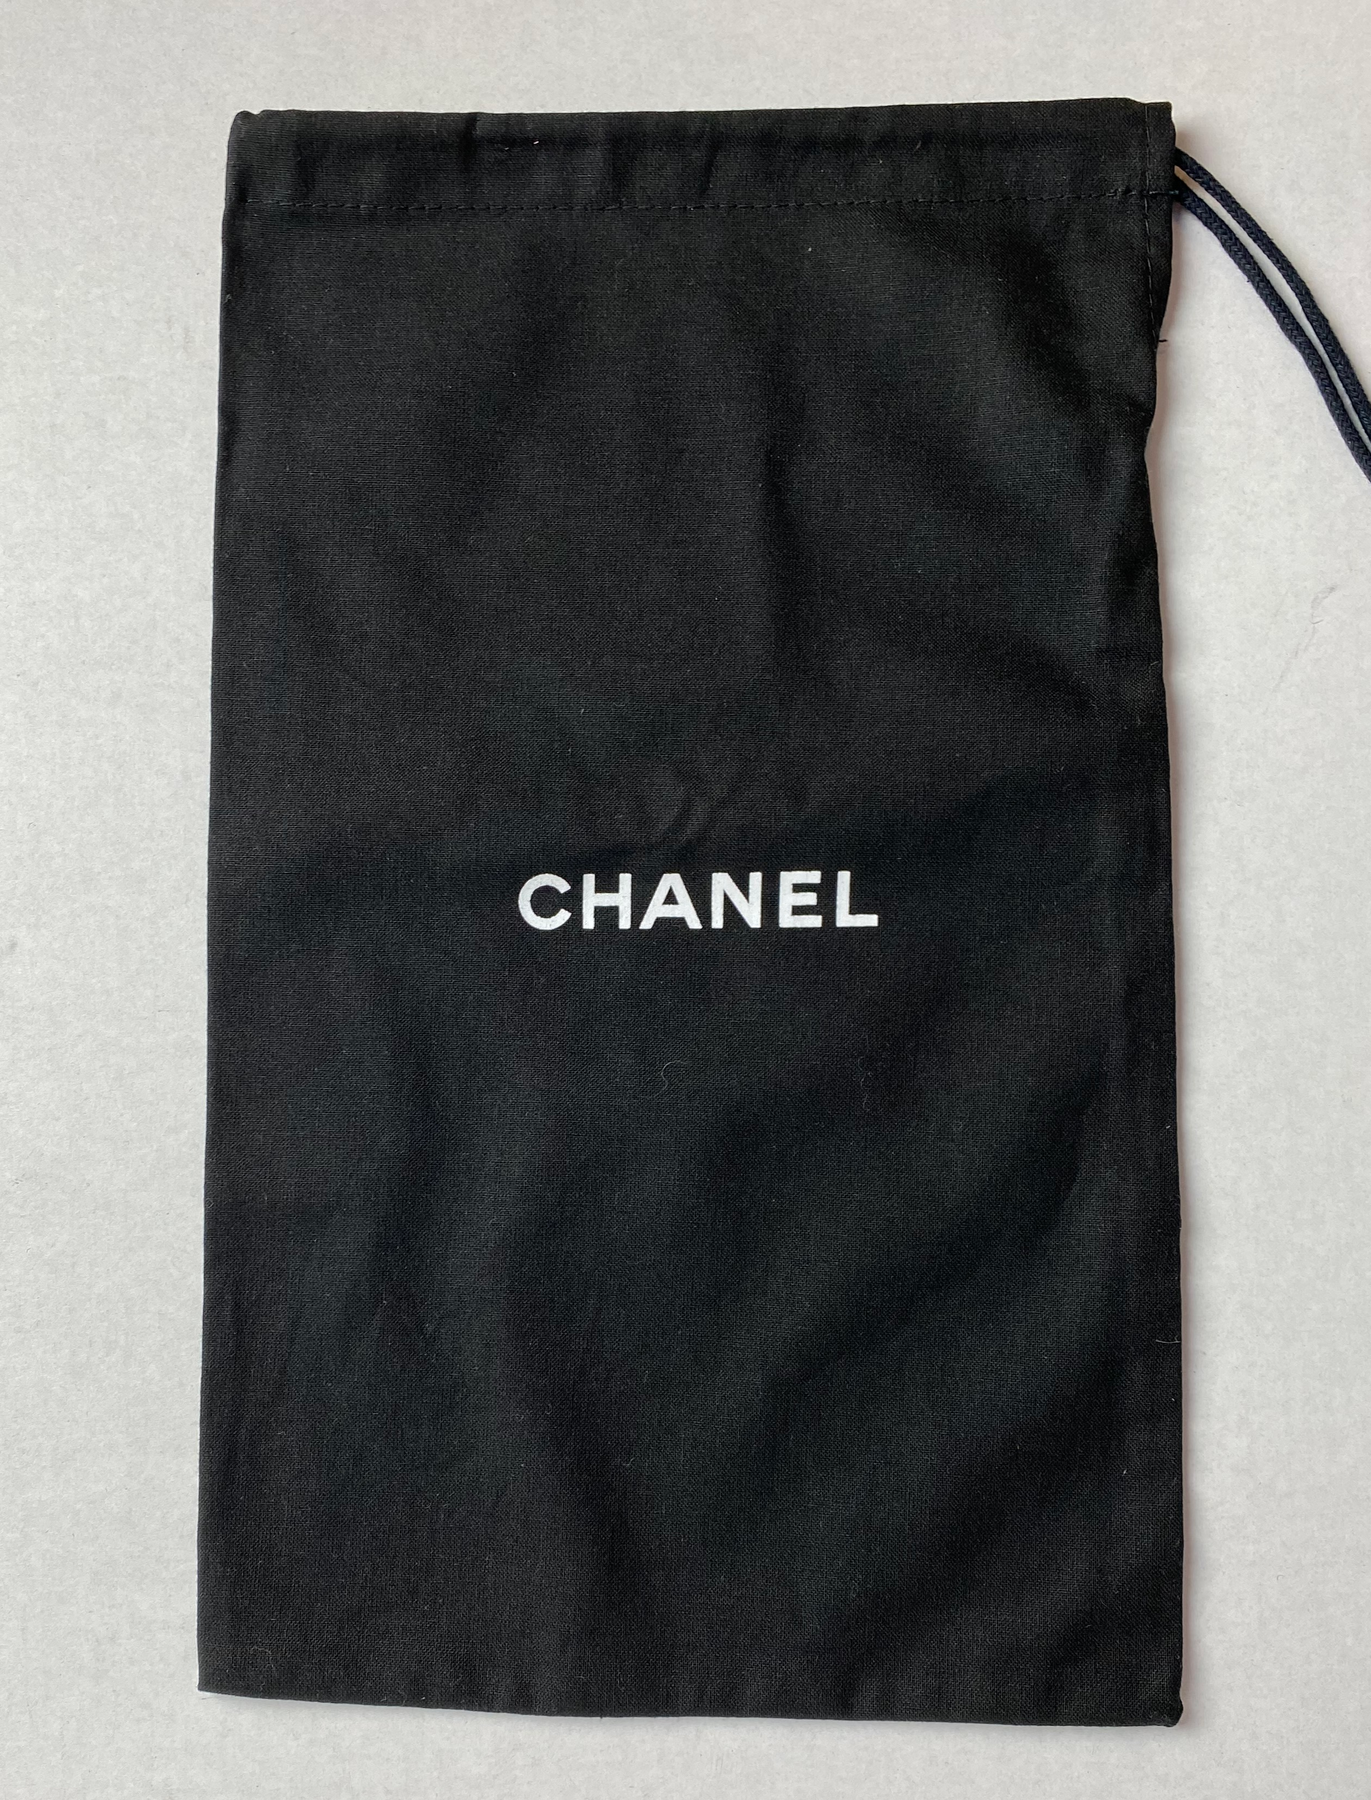 100% Auth Chanel Set of Two Black Shoe/ Small Bag/ Wallet Dust Bags 13x  8.25